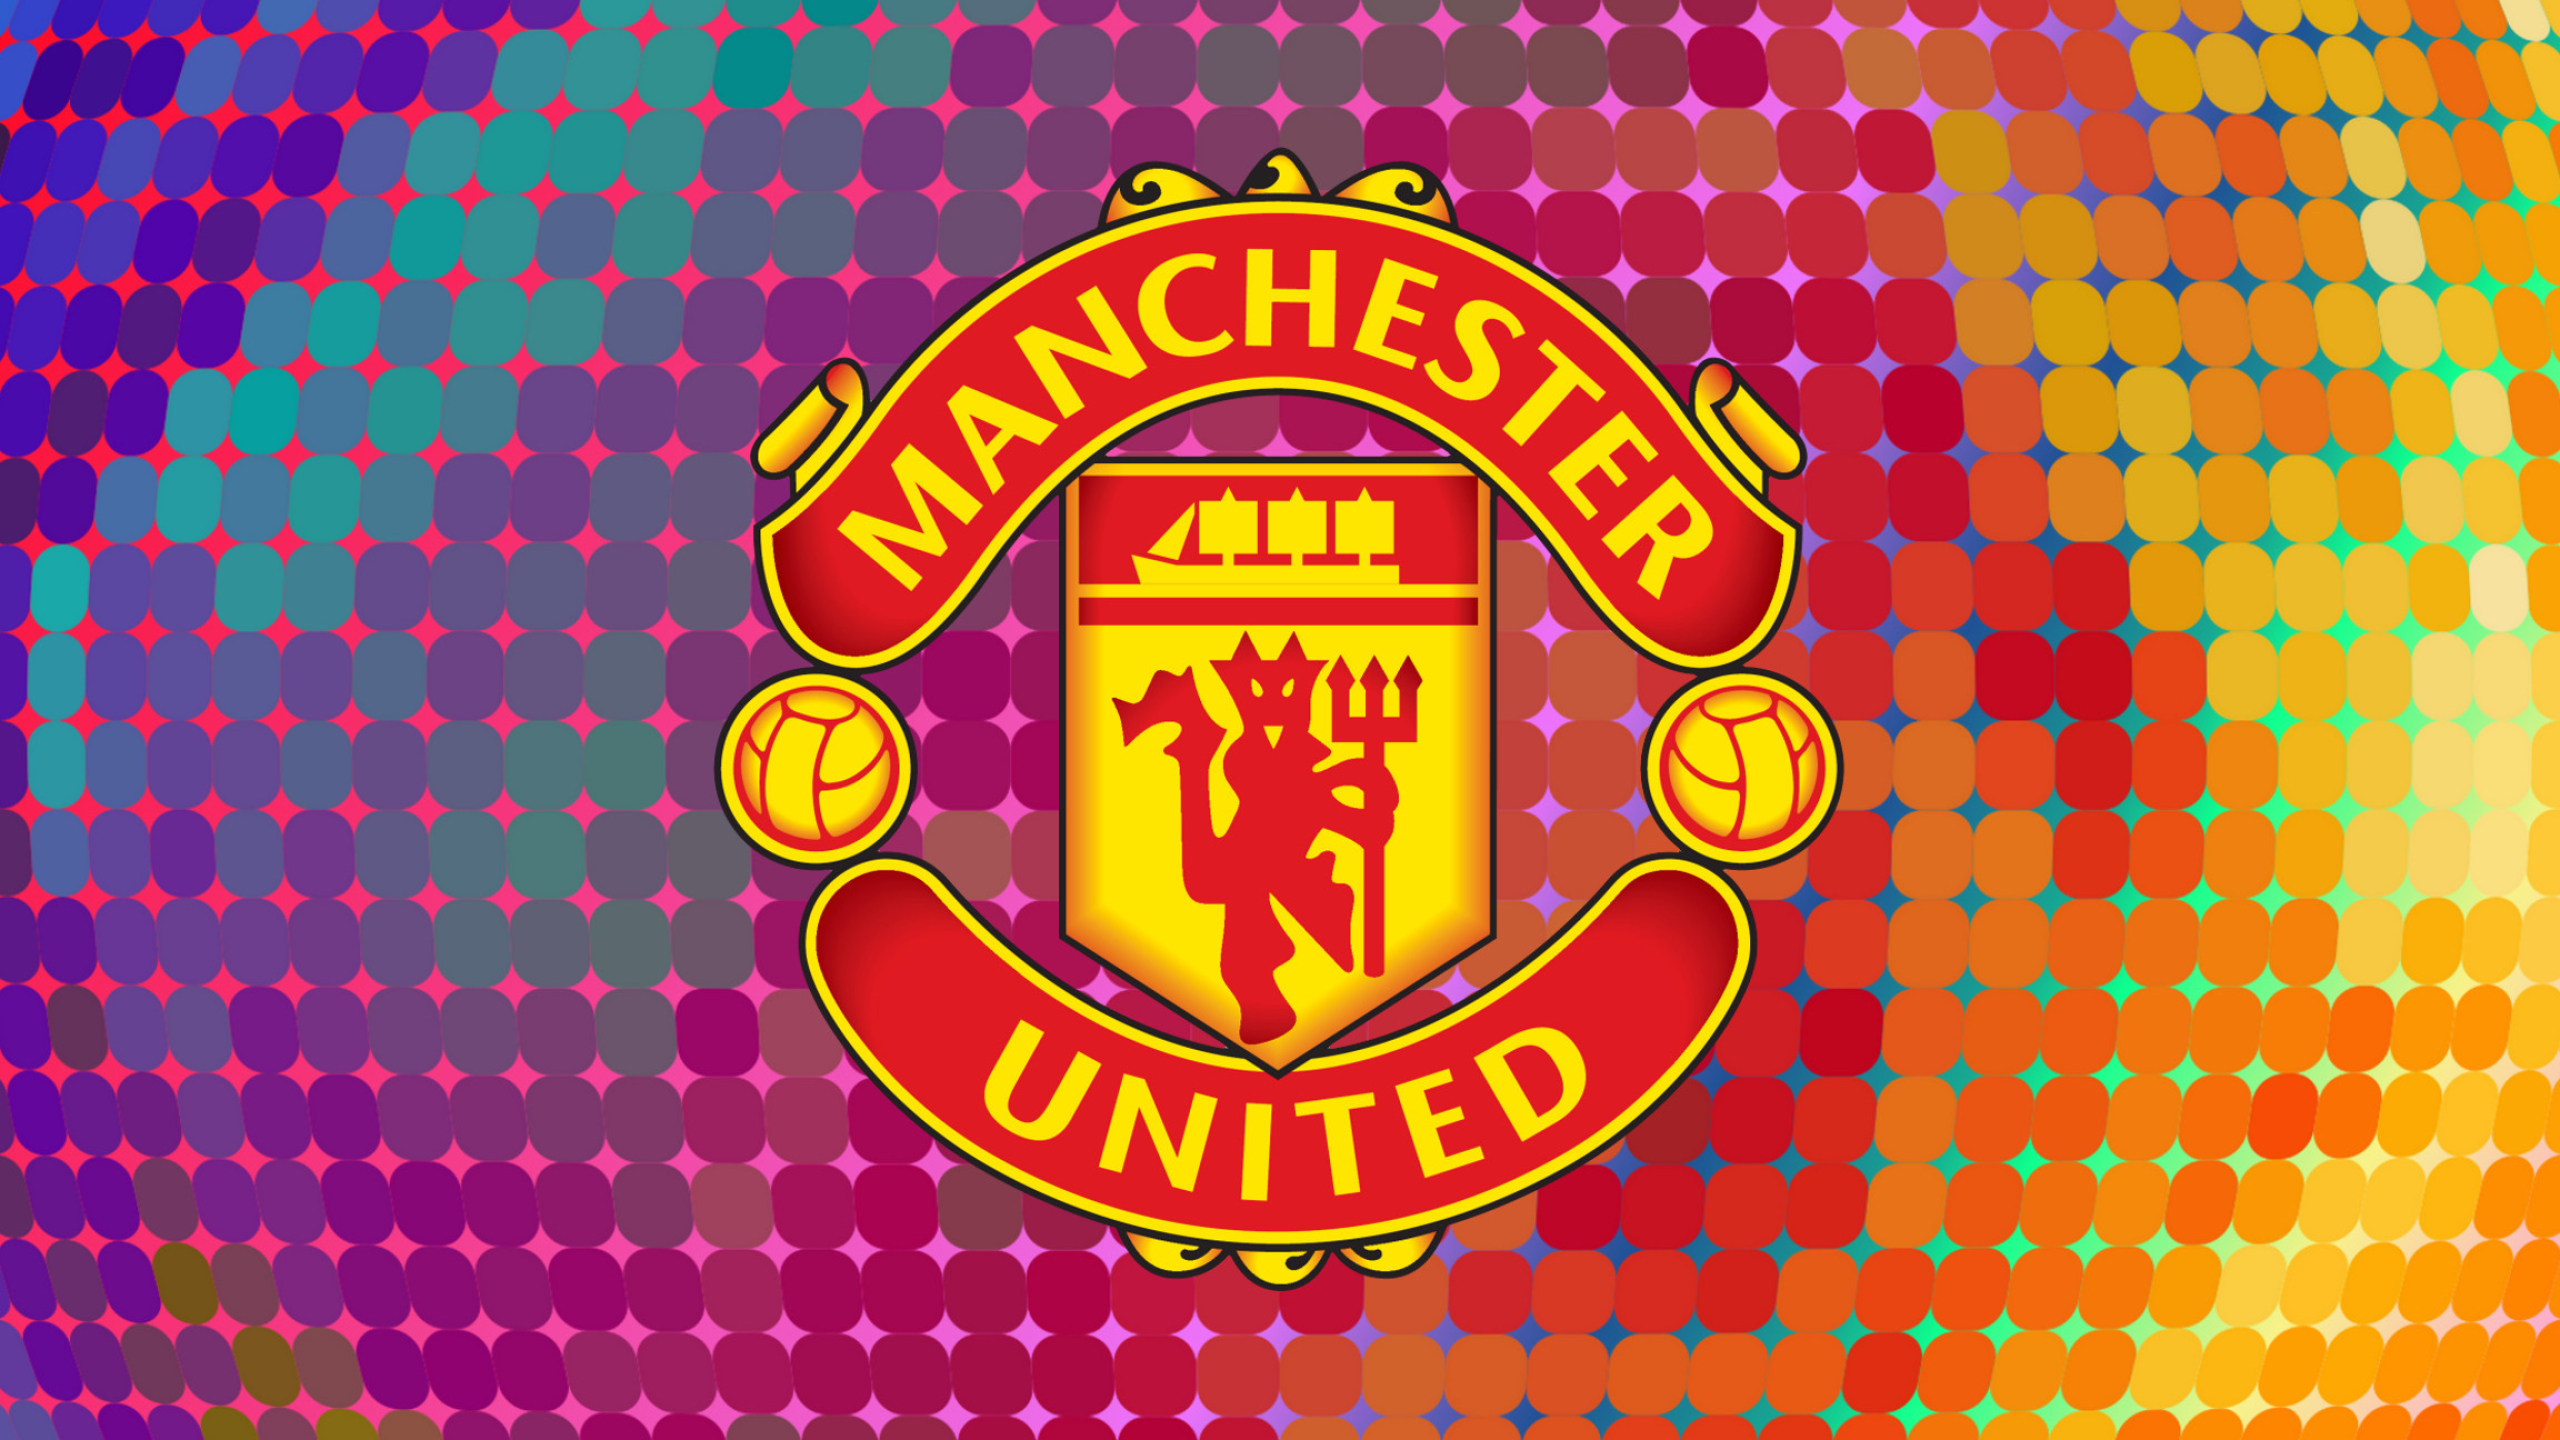 Manchester United: The team finished as Second Division runners-up in 1906. 2560x1440 HD Wallpaper.